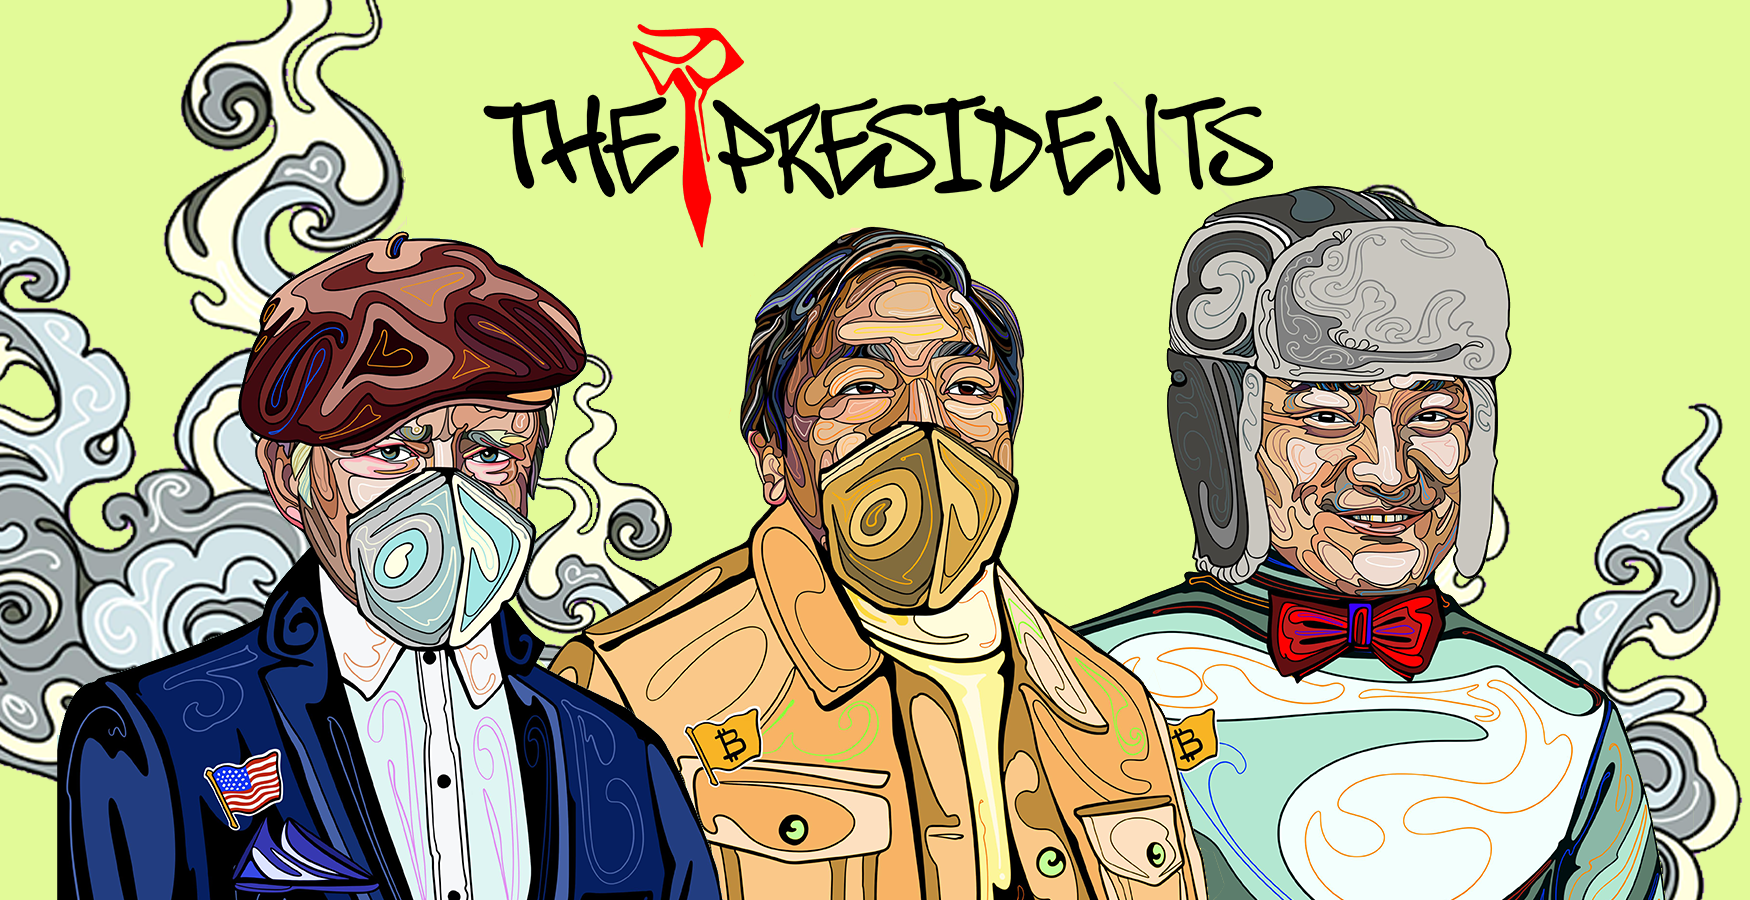 the presidents